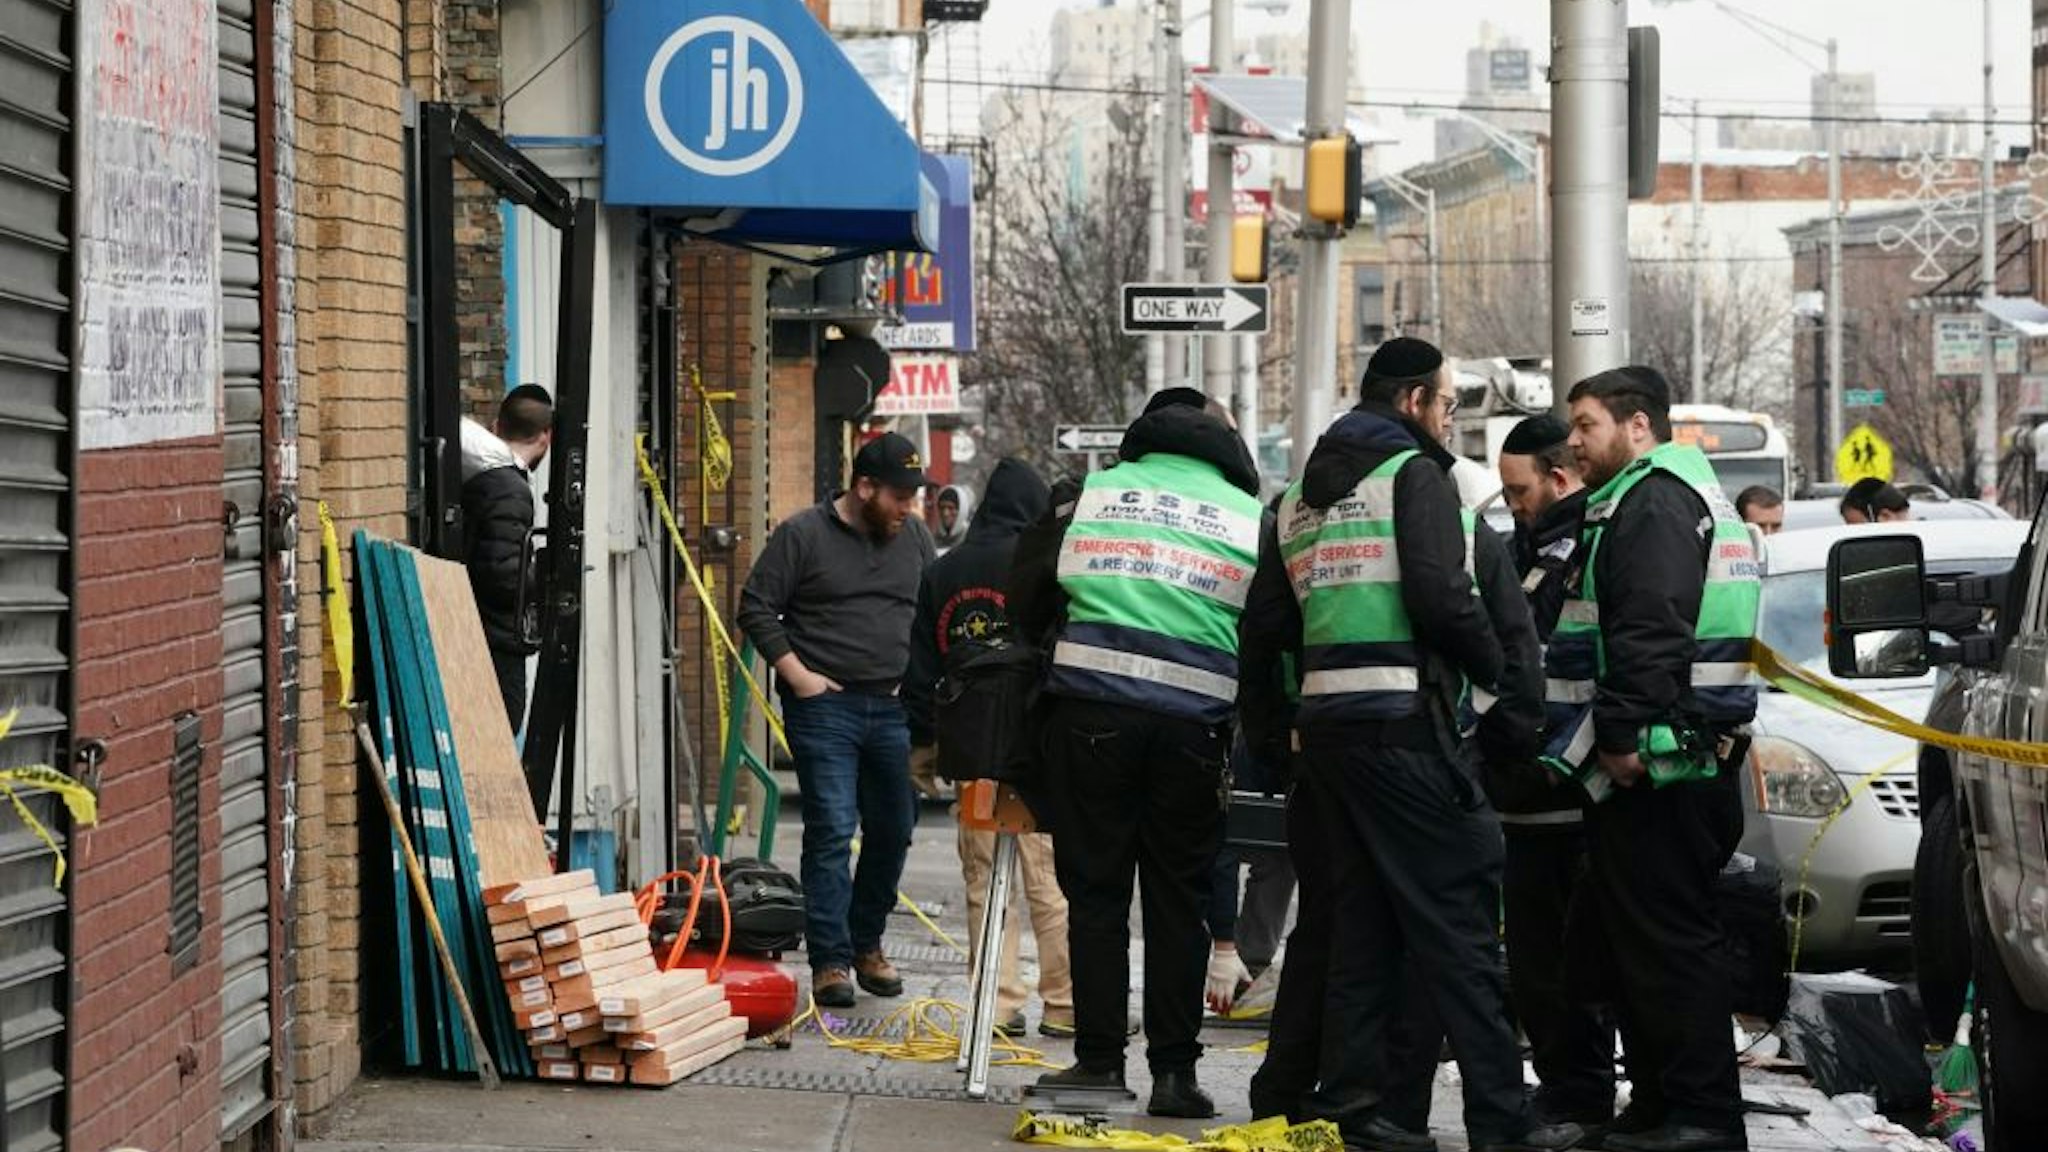 A demolition and recovery crew works at the scene of the December 10, 2019 shooting at a Jewish Deli on December 11, 2019 in Jersey City.